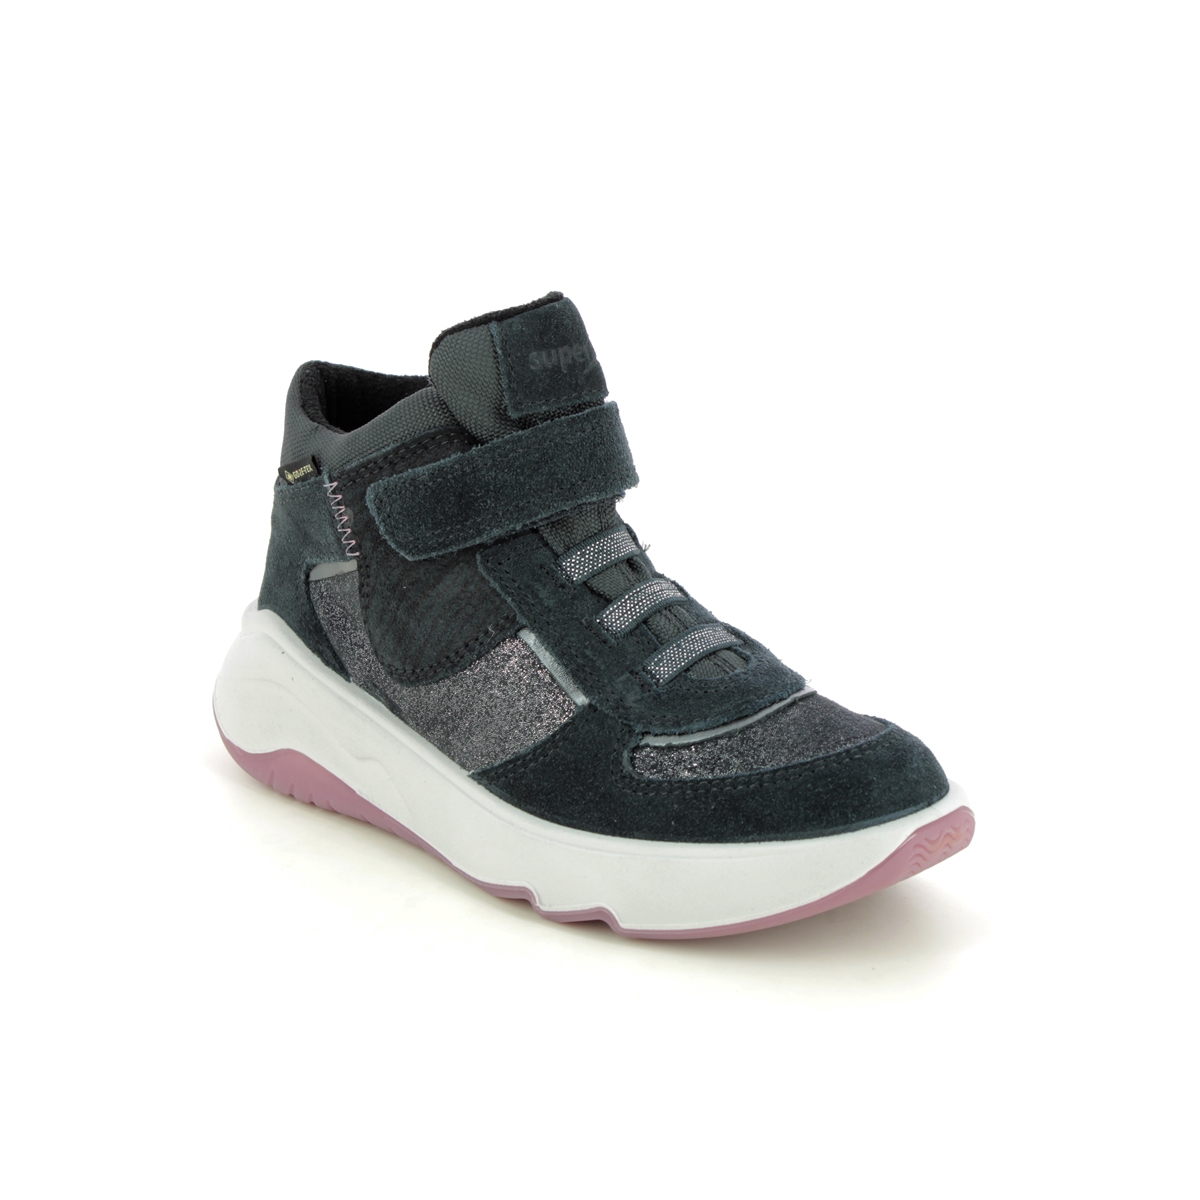 Superfit Melodie Ht Gtx Black Suede Kids girls trainers 1000632-2000 in a Plain Leather and Man-made in Size 34